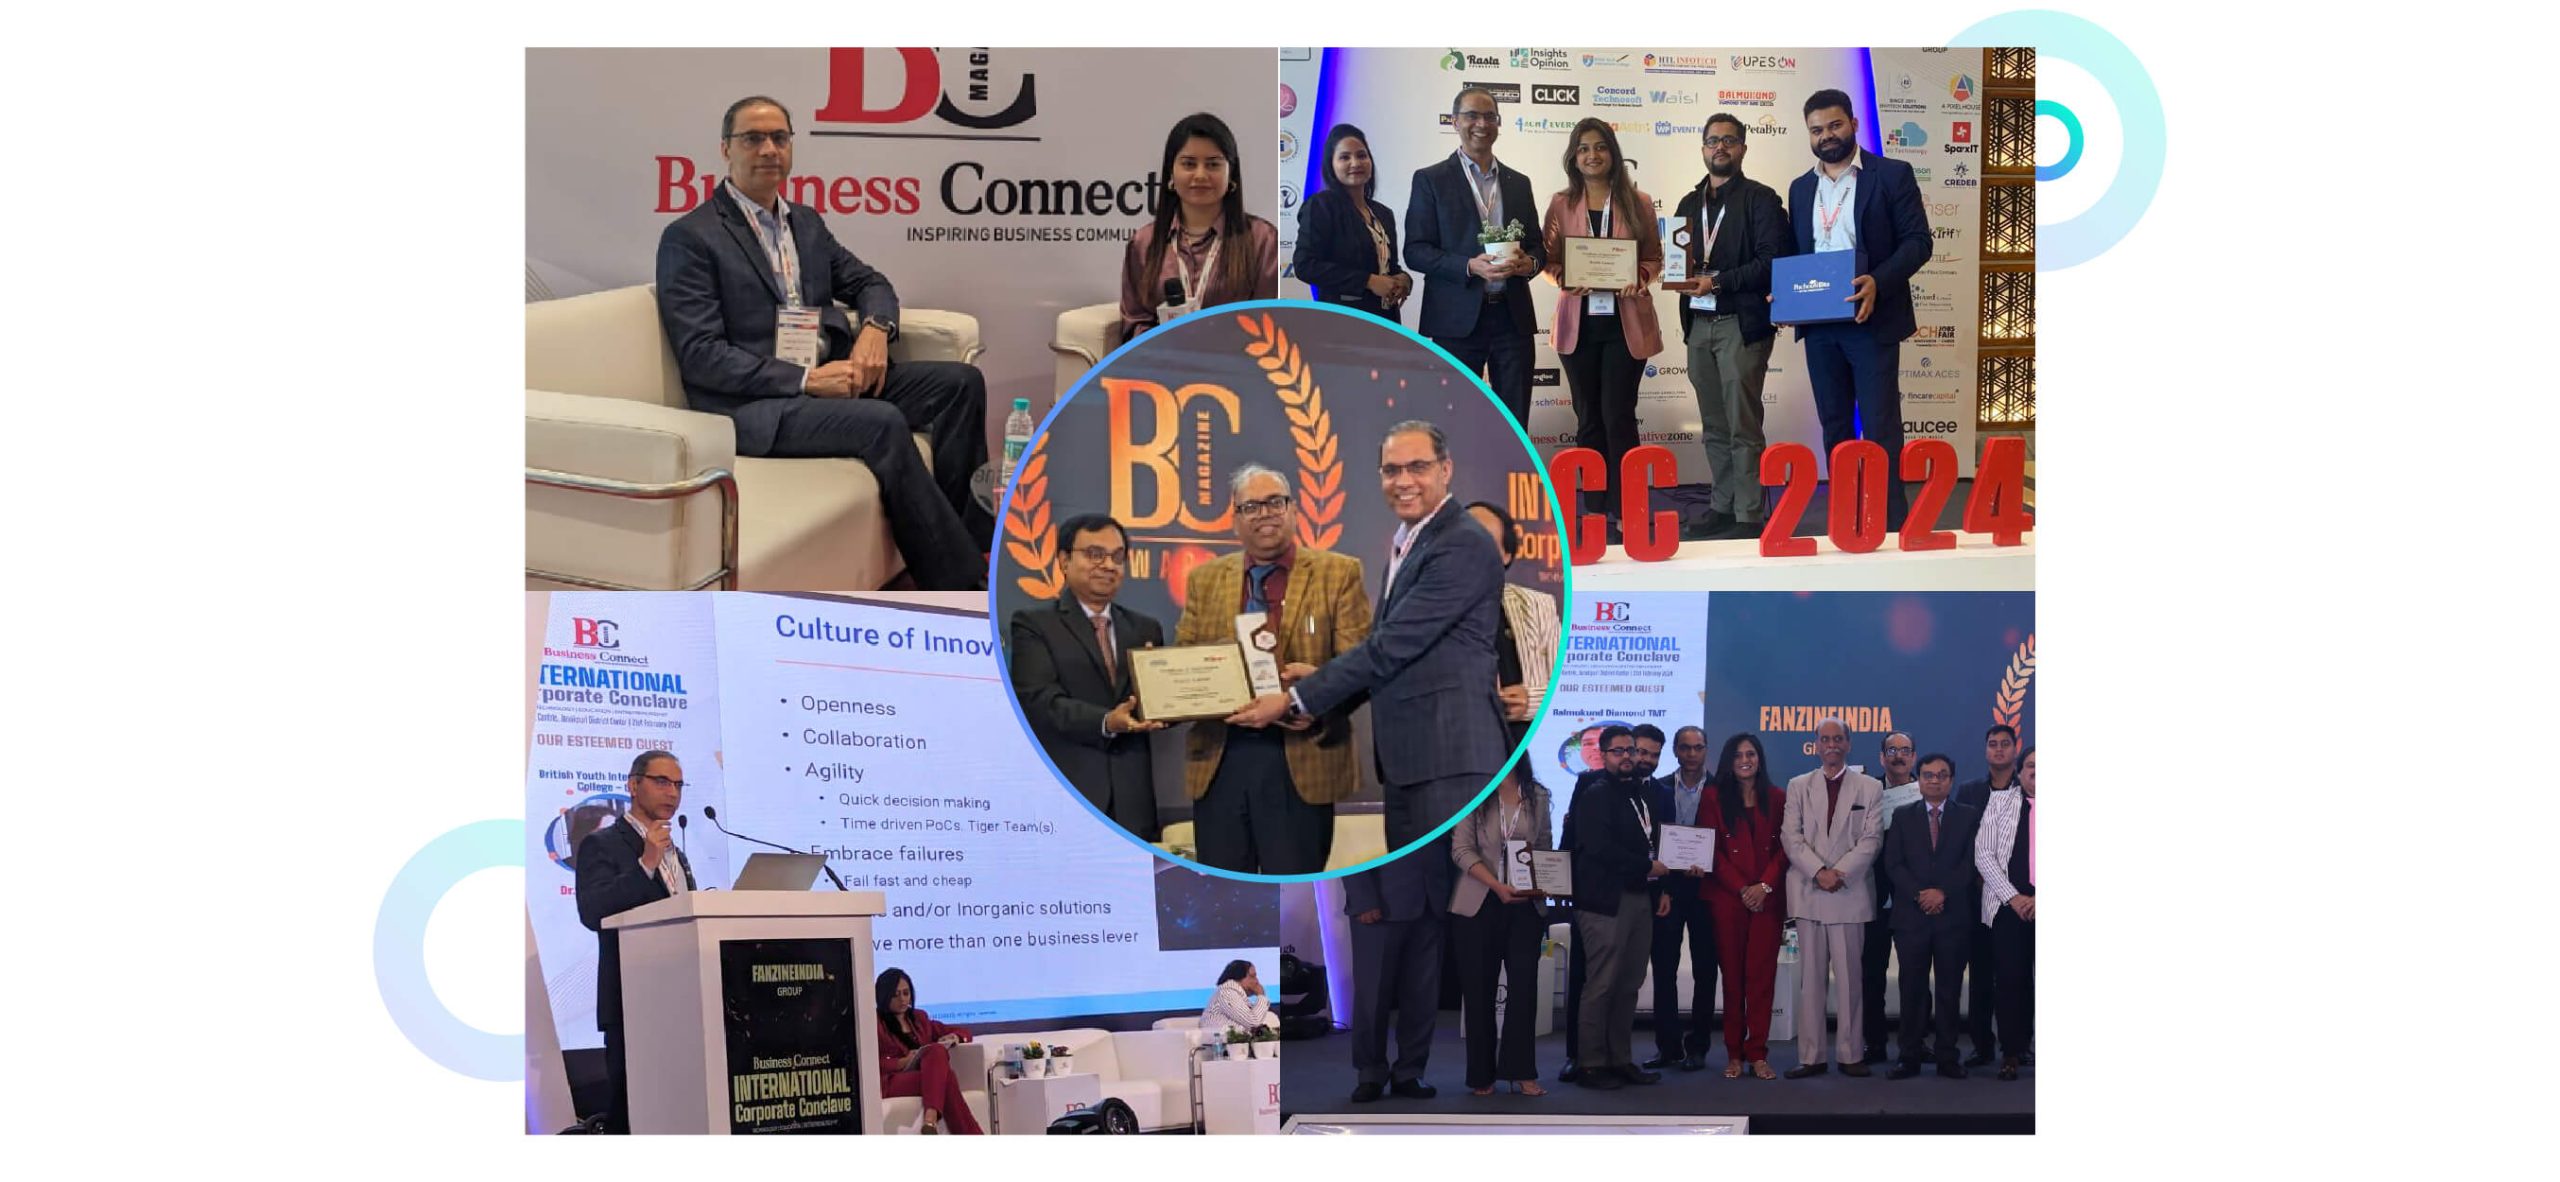 WAISL Bestowed With ‘Best Airport IT Company’ Award by Business Connect Magazine